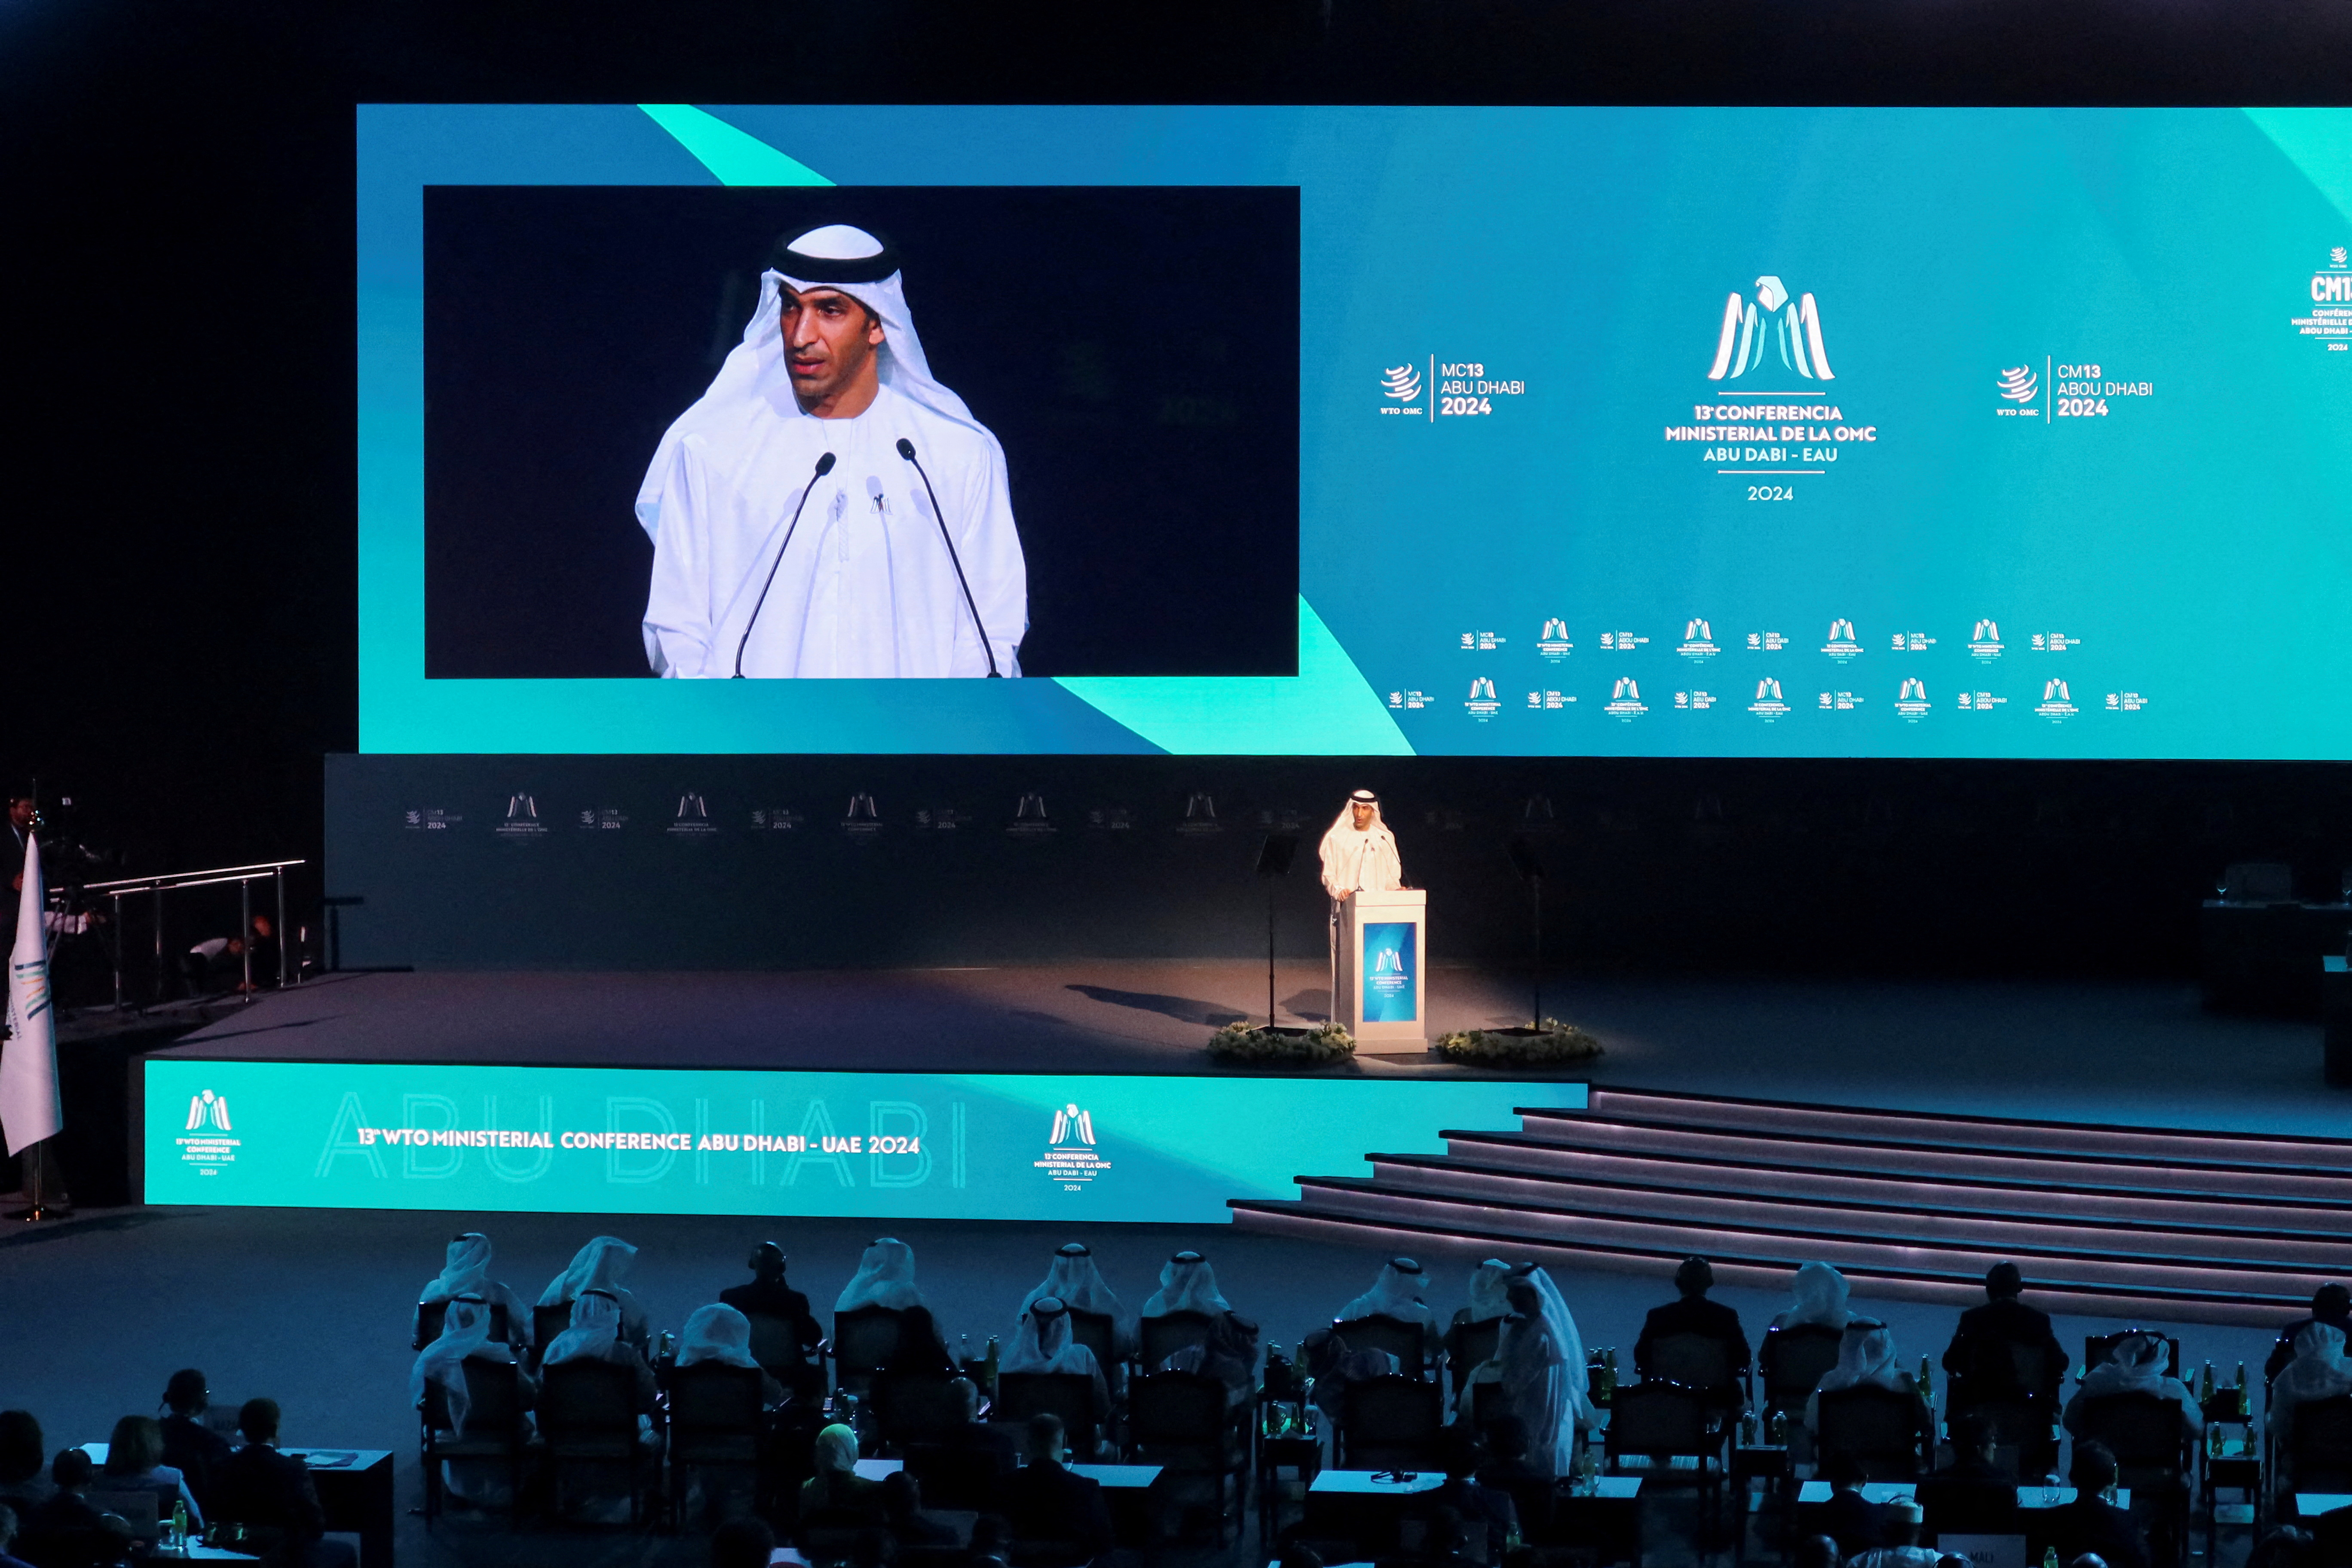 UAE Minister of Foreign Trade Thani bin Ahmed Al Zeyoudi speaks during the opening ceremony of the WTO ministerial meeting in Abu Dhabi